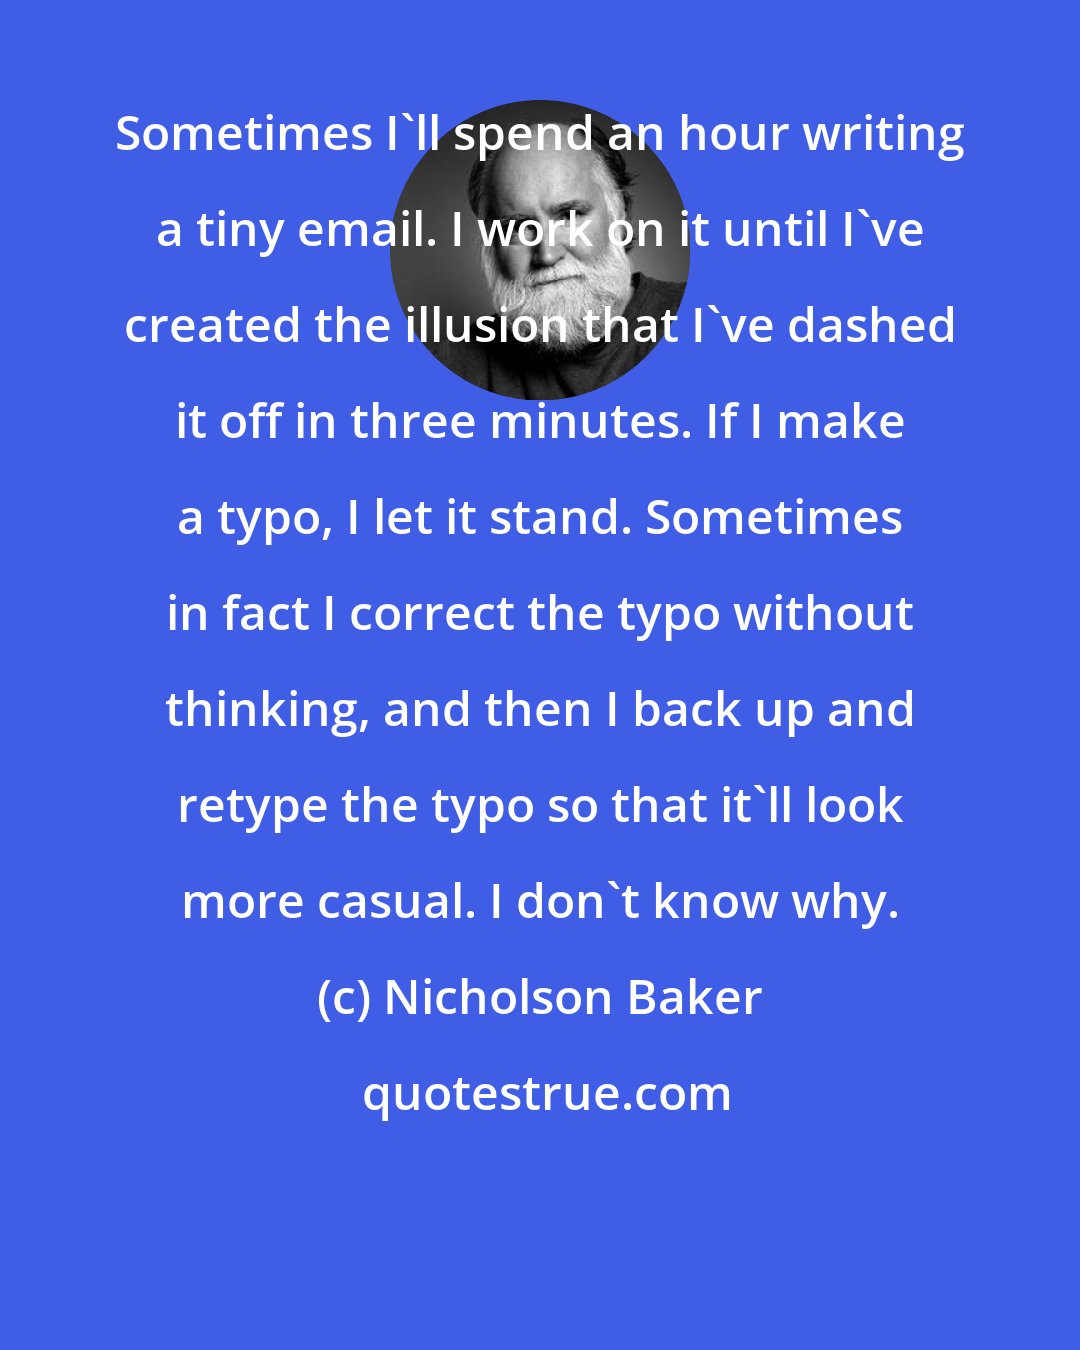 Nicholson Baker: Sometimes I'll spend an hour writing a tiny email. I work on it until I've created the illusion that I've dashed it off in three minutes. If I make a typo, I let it stand. Sometimes in fact I correct the typo without thinking, and then I back up and retype the typo so that it'll look more casual. I don't know why.